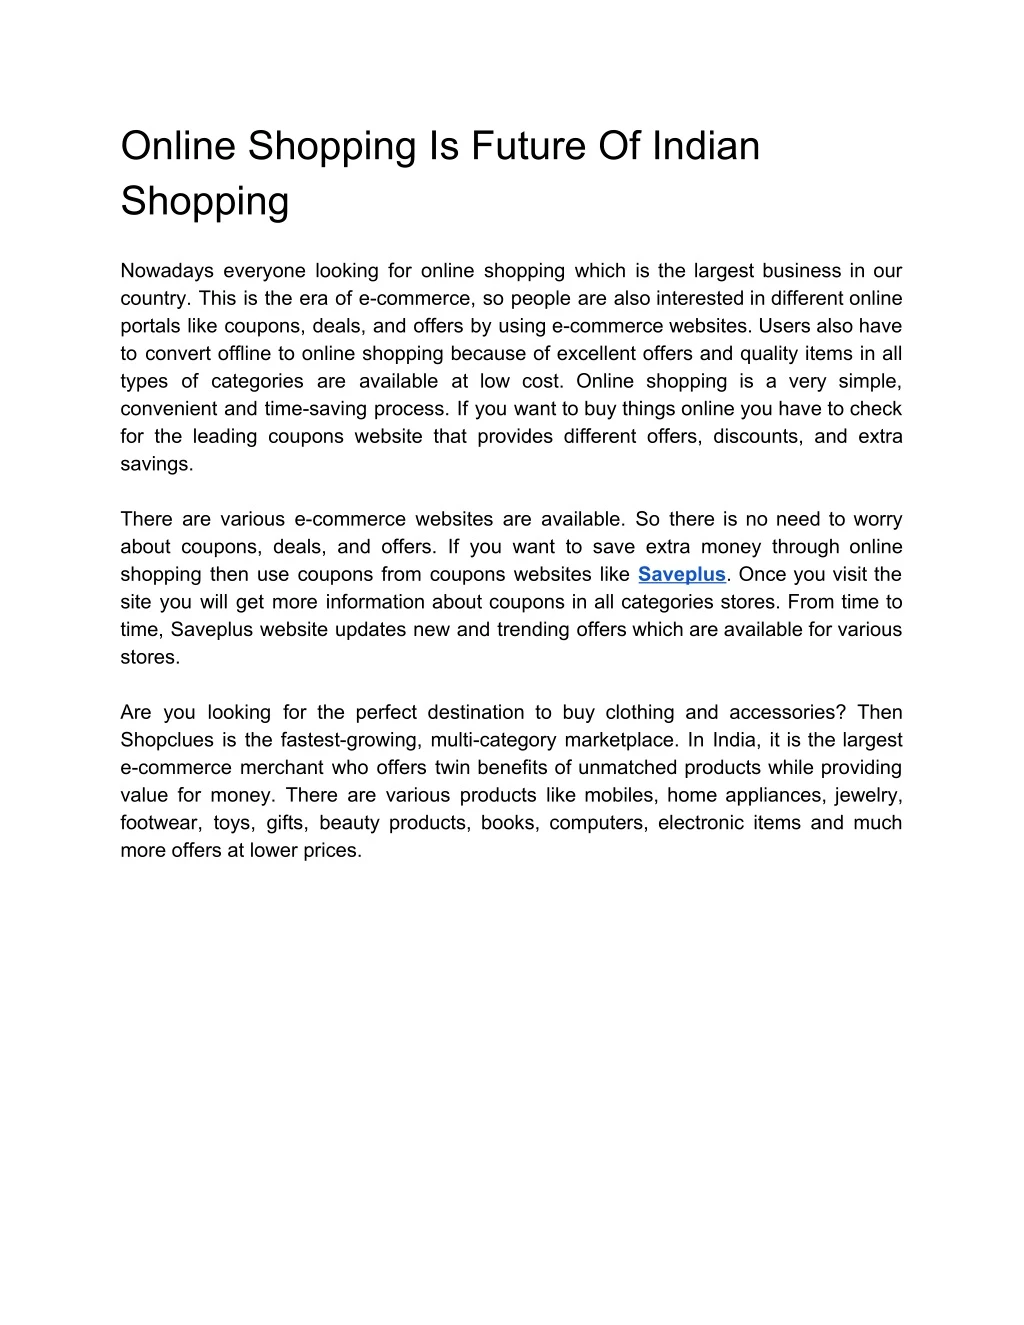 online shopping is future of indian shopping